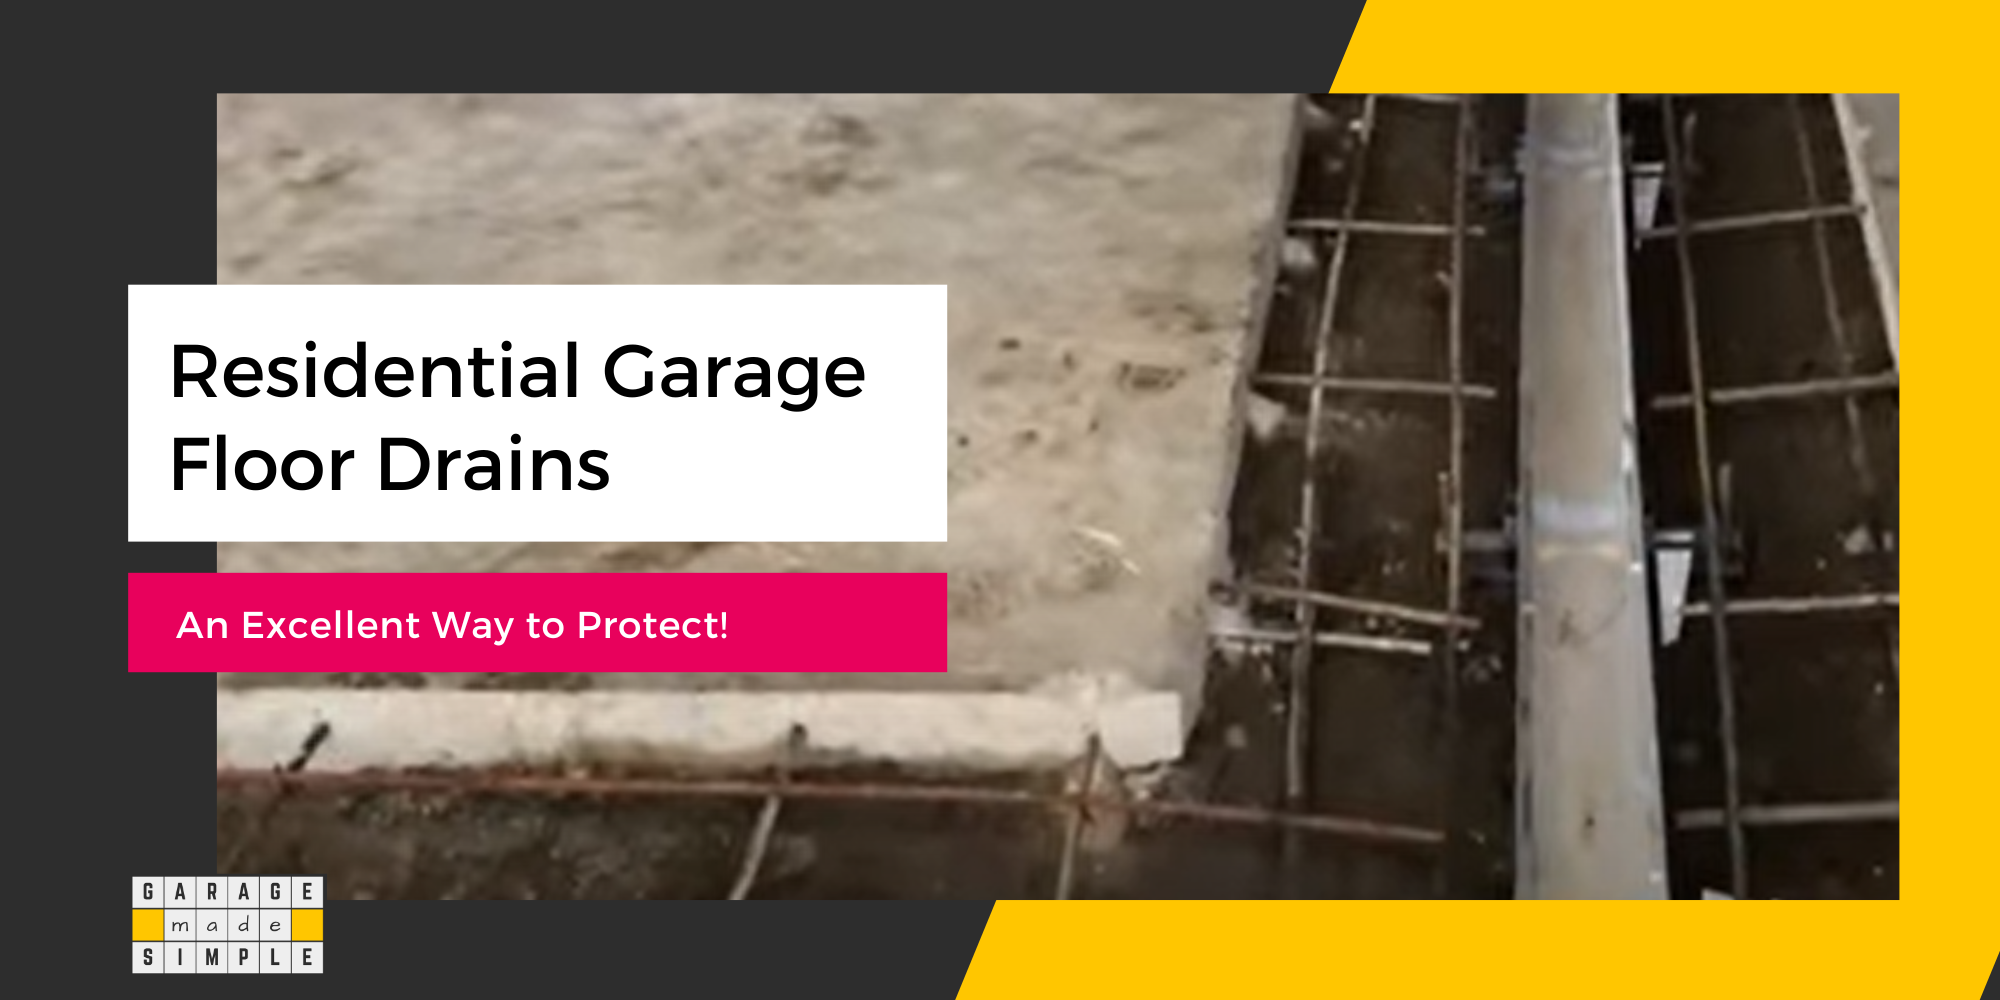 Residential Garage Floor Drains: An Excellent Way To Protect!